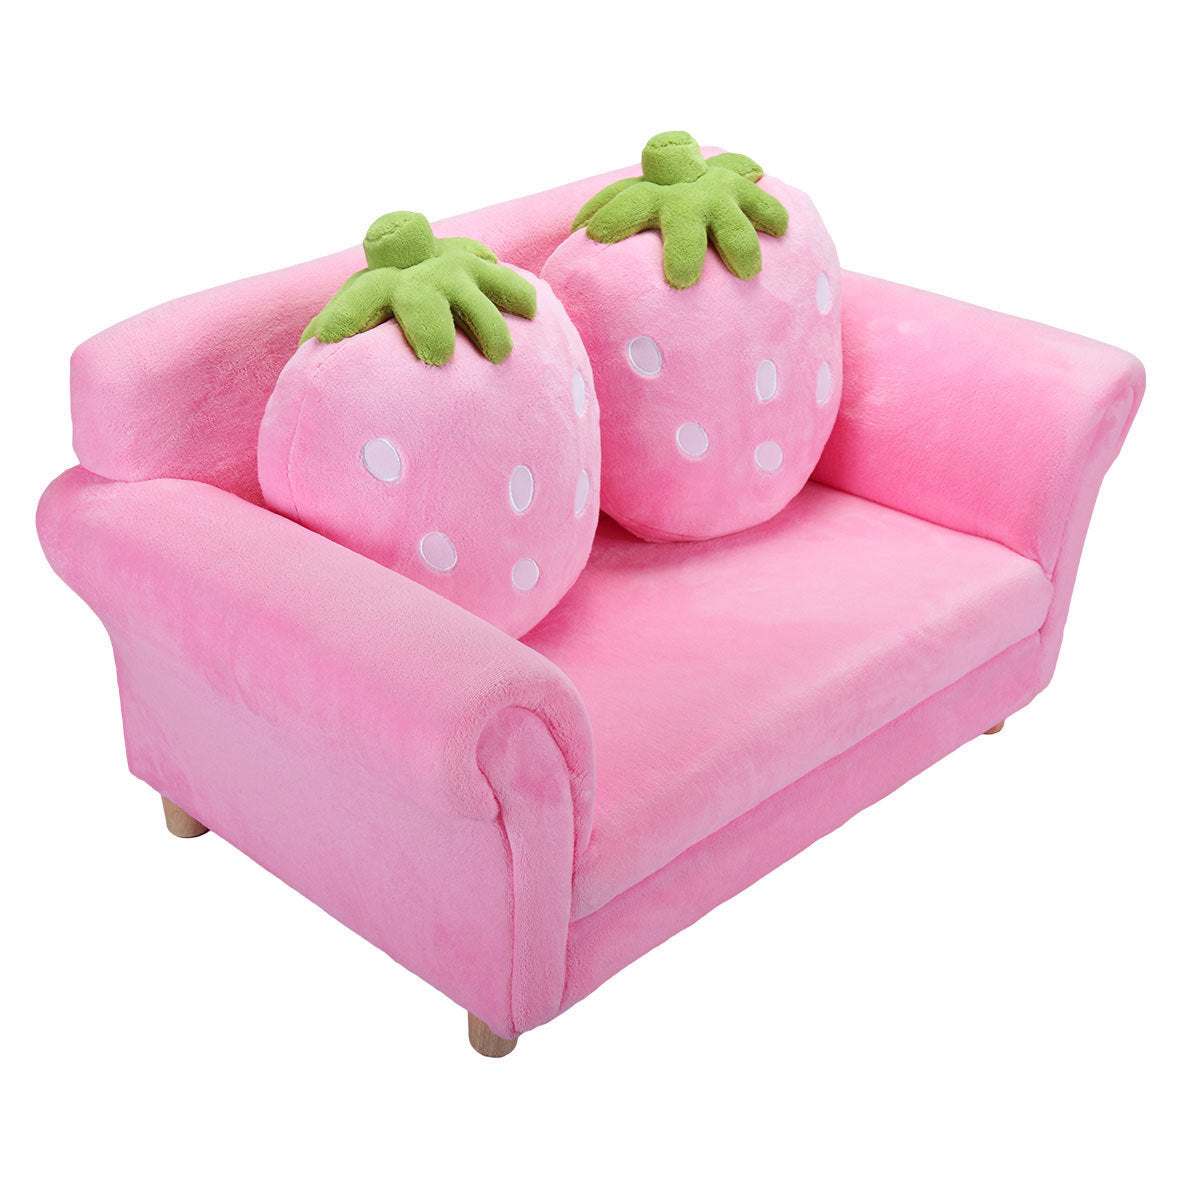 Children’s Double Pink Sofa Chair w/ 2 Strawberry Pillows and Soft Surfaces